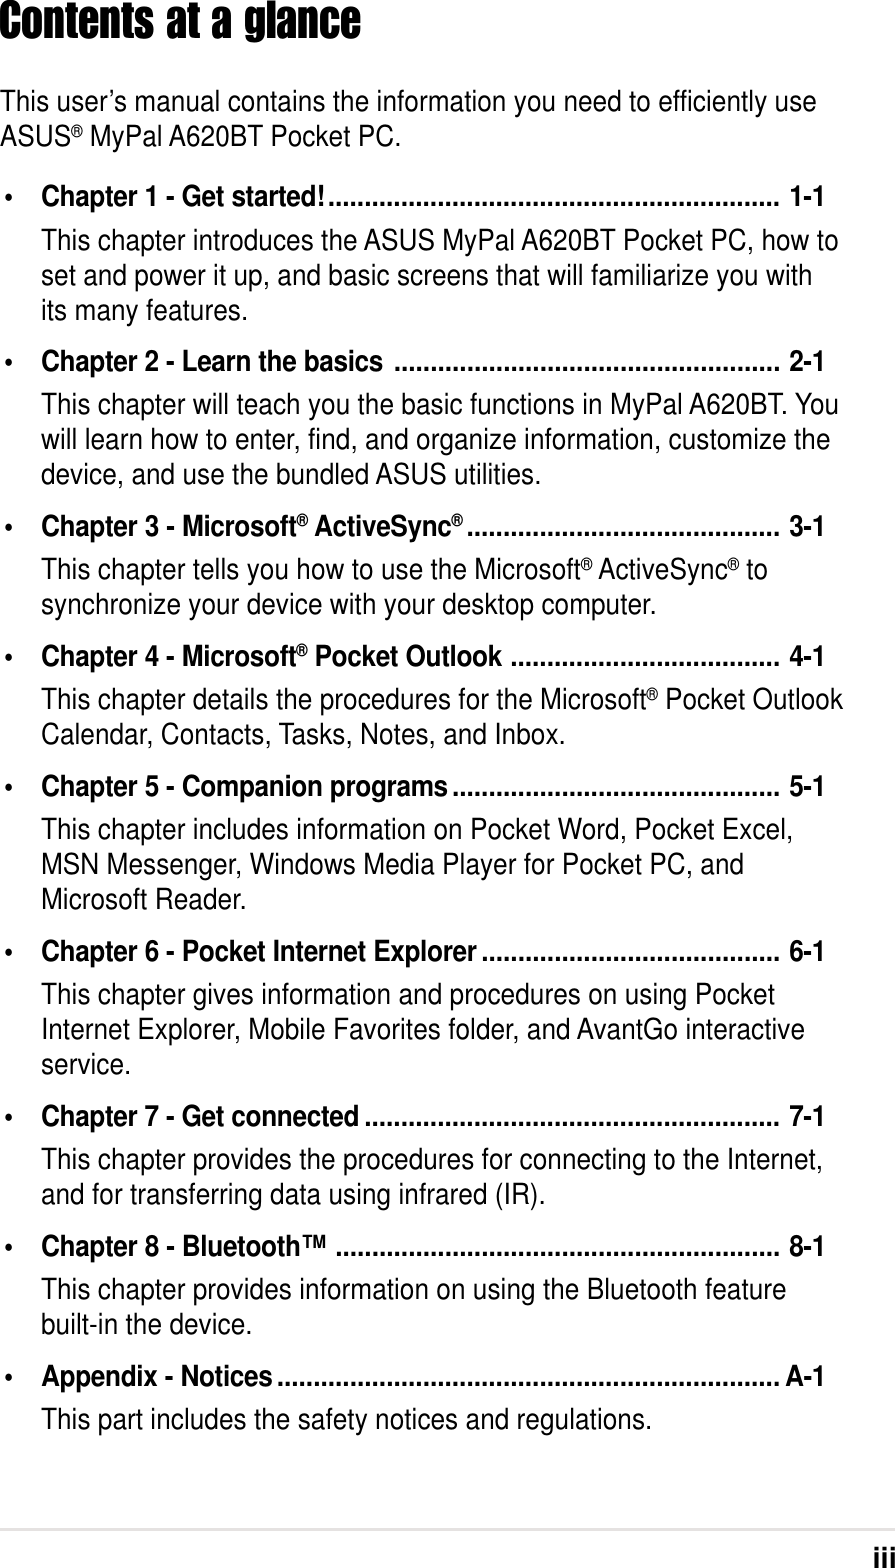 iiiContents at a glanceThis user’s manual contains the information you need to efficiently useASUS® MyPal A620BT Pocket PC.•Chapter 1 - Get started!.............................................................. 1-1This chapter introduces the ASUS MyPal A620BT Pocket PC, how toset and power it up, and basic screens that will familiarize you withits many features.•Chapter 2 - Learn the basics ..................................................... 2-1This chapter will teach you the basic functions in MyPal A620BT. Youwill learn how to enter, find, and organize information, customize thedevice, and use the bundled ASUS utilities.•Chapter 3 - Microsoft® ActiveSync®........................................... 3-1This chapter tells you how to use the Microsoft® ActiveSync® tosynchronize your device with your desktop computer.•Chapter 4 - Microsoft® Pocket Outlook ..................................... 4-1This chapter details the procedures for the Microsoft® Pocket OutlookCalendar, Contacts, Tasks, Notes, and Inbox.•Chapter 5 - Companion programs............................................. 5-1This chapter includes information on Pocket Word, Pocket Excel,MSN Messenger, Windows Media Player for Pocket PC, andMicrosoft Reader.•Chapter 6 - Pocket Internet Explorer ......................................... 6-1This chapter gives information and procedures on using PocketInternet Explorer, Mobile Favorites folder, and AvantGo interactiveservice.•Chapter 7 - Get connected ......................................................... 7-1This chapter provides the procedures for connecting to the Internet,and for transferring data using infrared (IR).•Chapter 8 - Bluetooth™............................................................. 8-1This chapter provides information on using the Bluetooth featurebuilt-in the device.•Appendix - Notices..................................................................... A-1This part includes the safety notices and regulations.